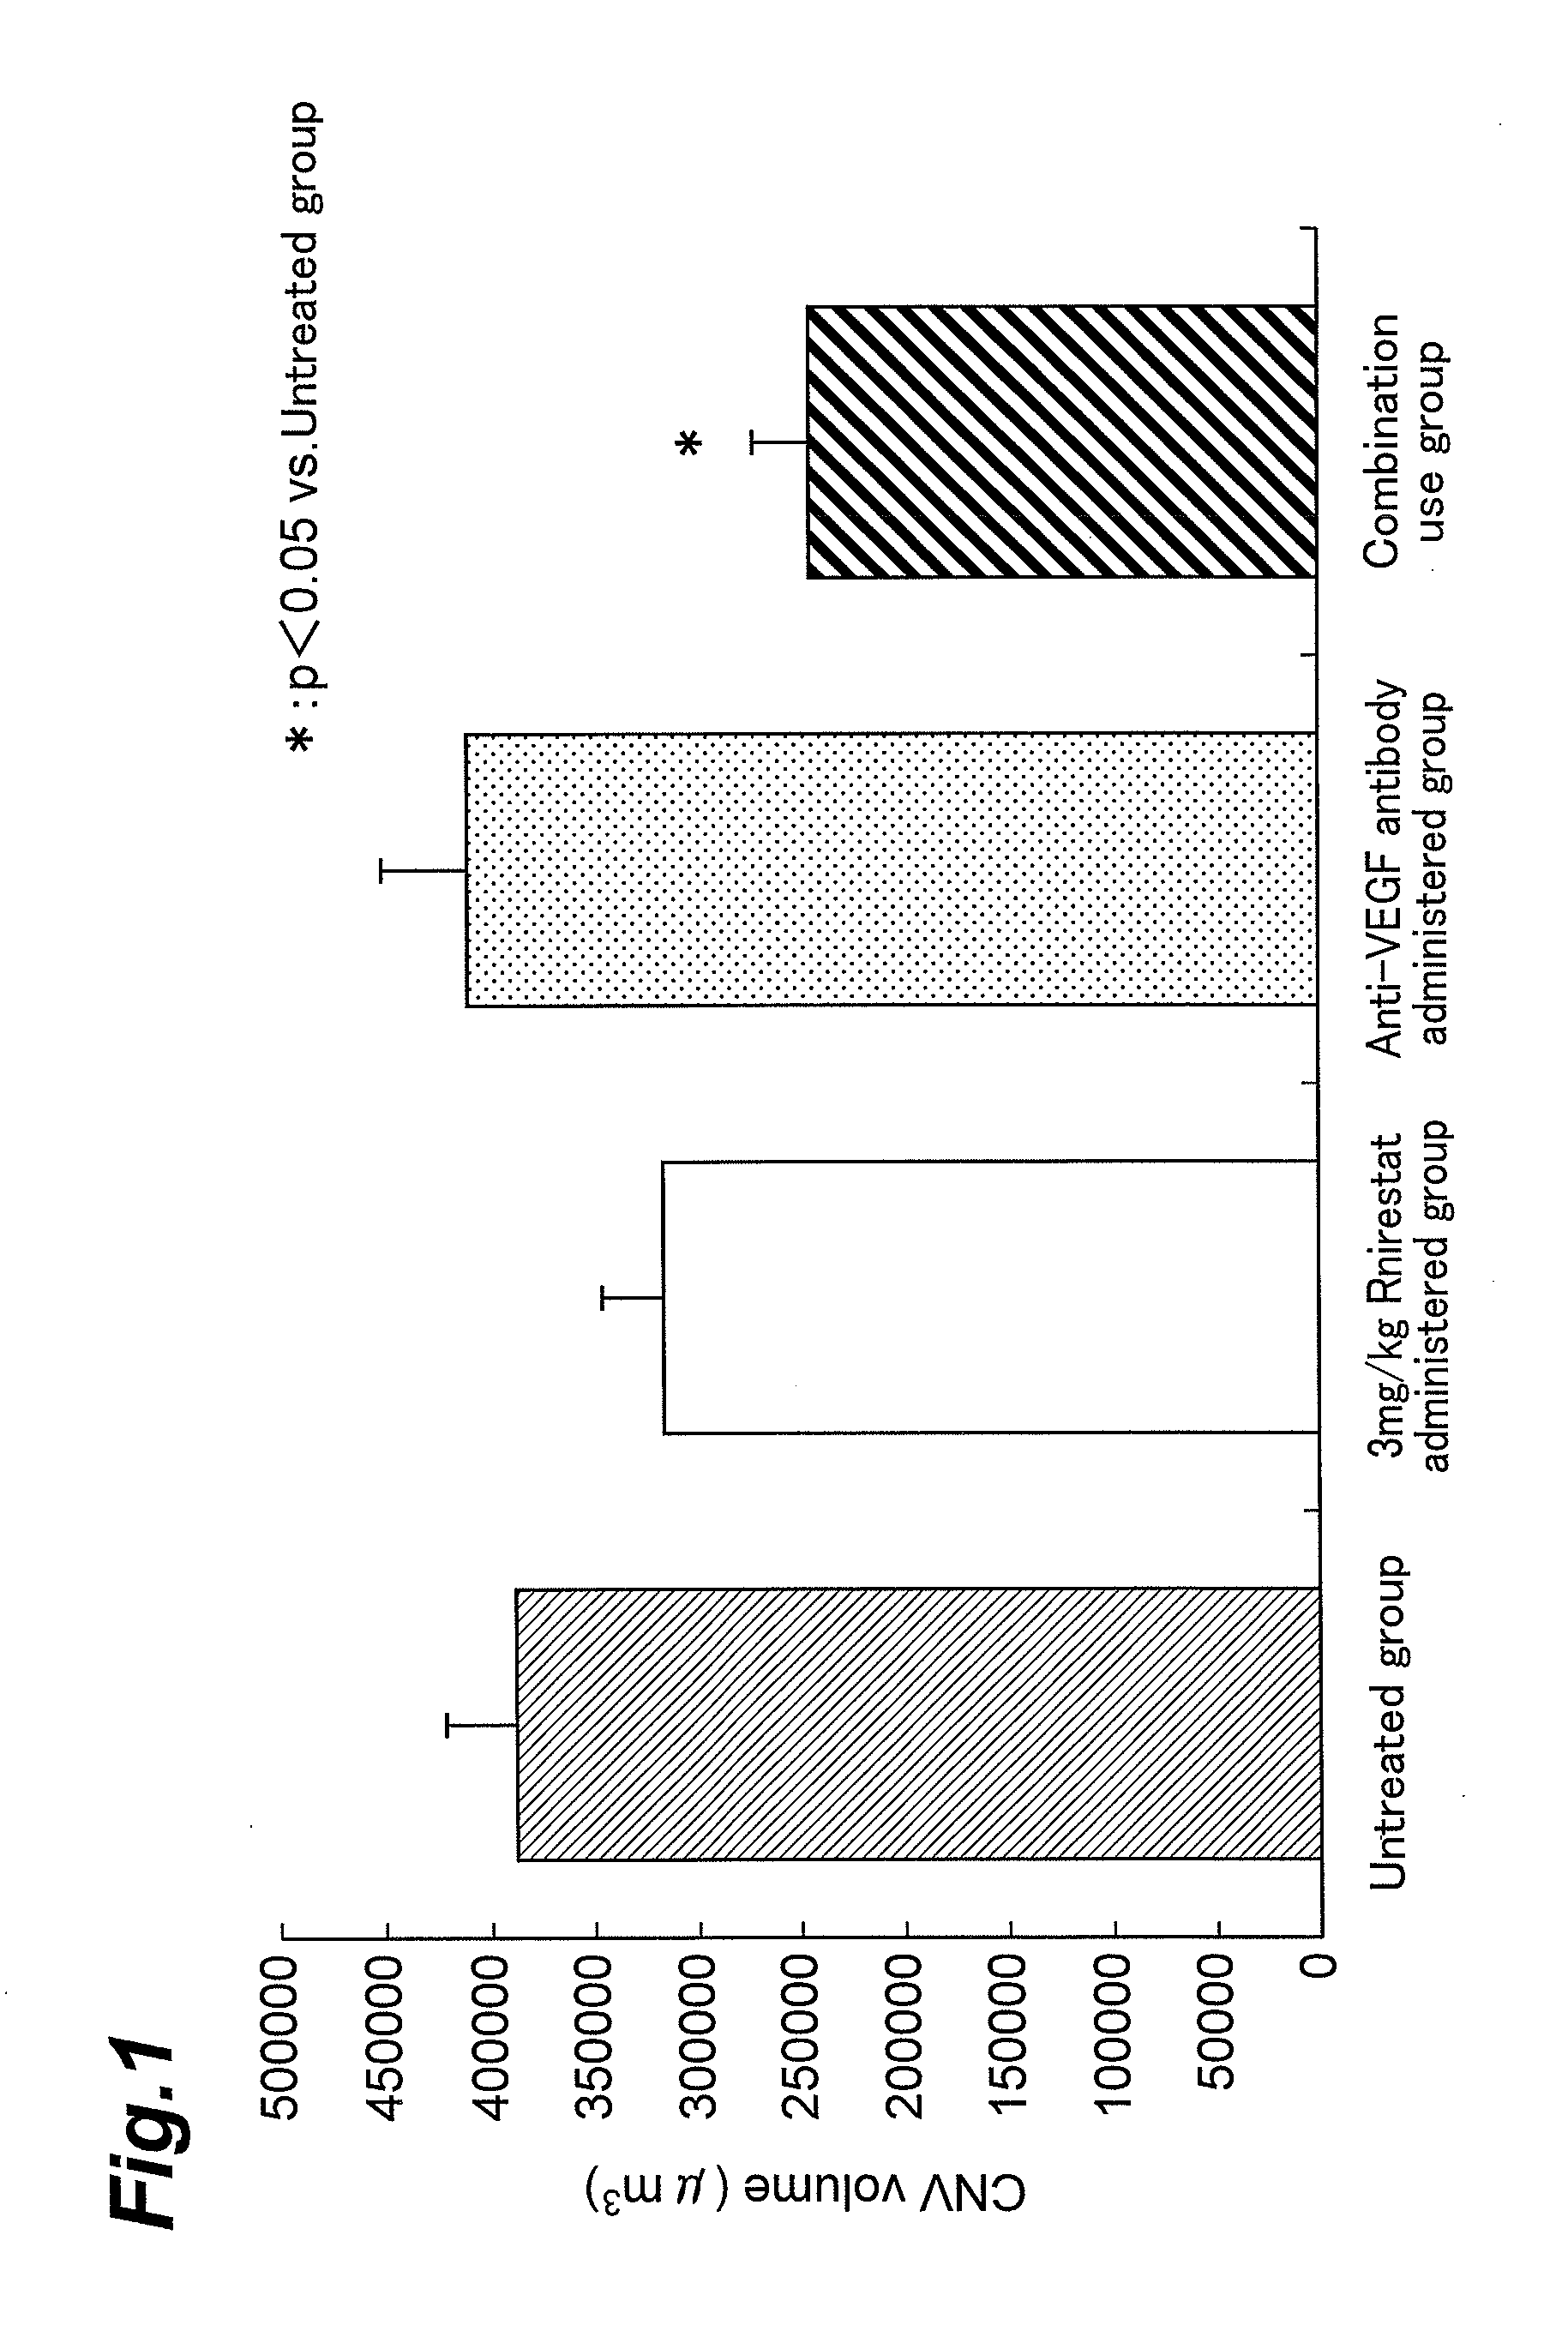 Medicinal Agent for Prevention or Treatment of Diseases Associated with Intraocular Neovascularization and/or Intraocular Vascular Hyperpermeability